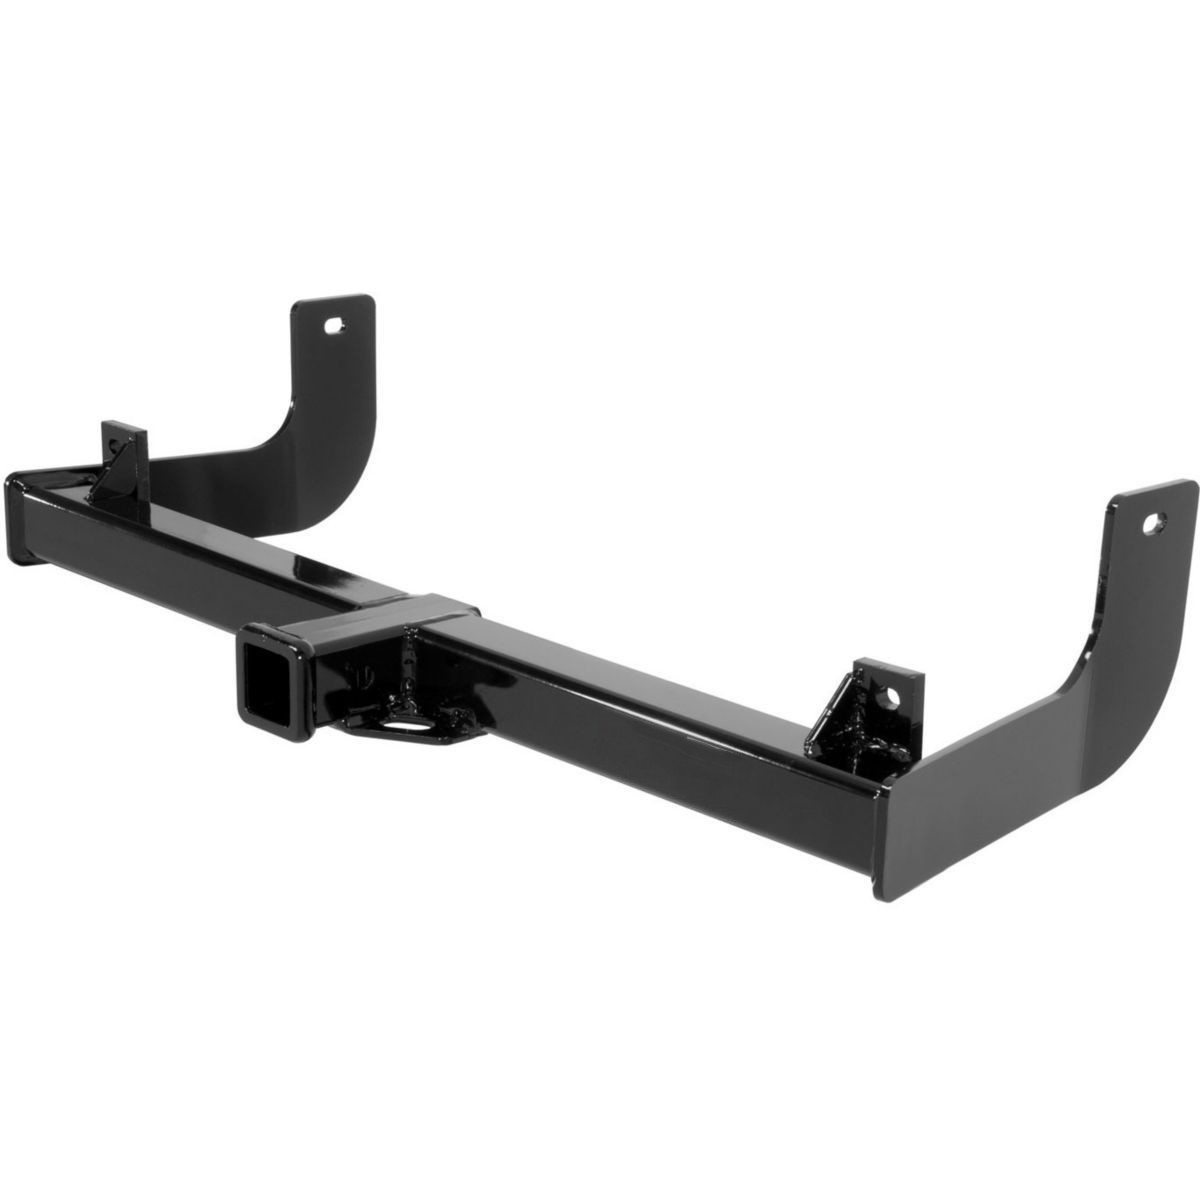 Ford F-150 Drop Hitch For Truck , Adjustable Receiver Hitches For Trucks